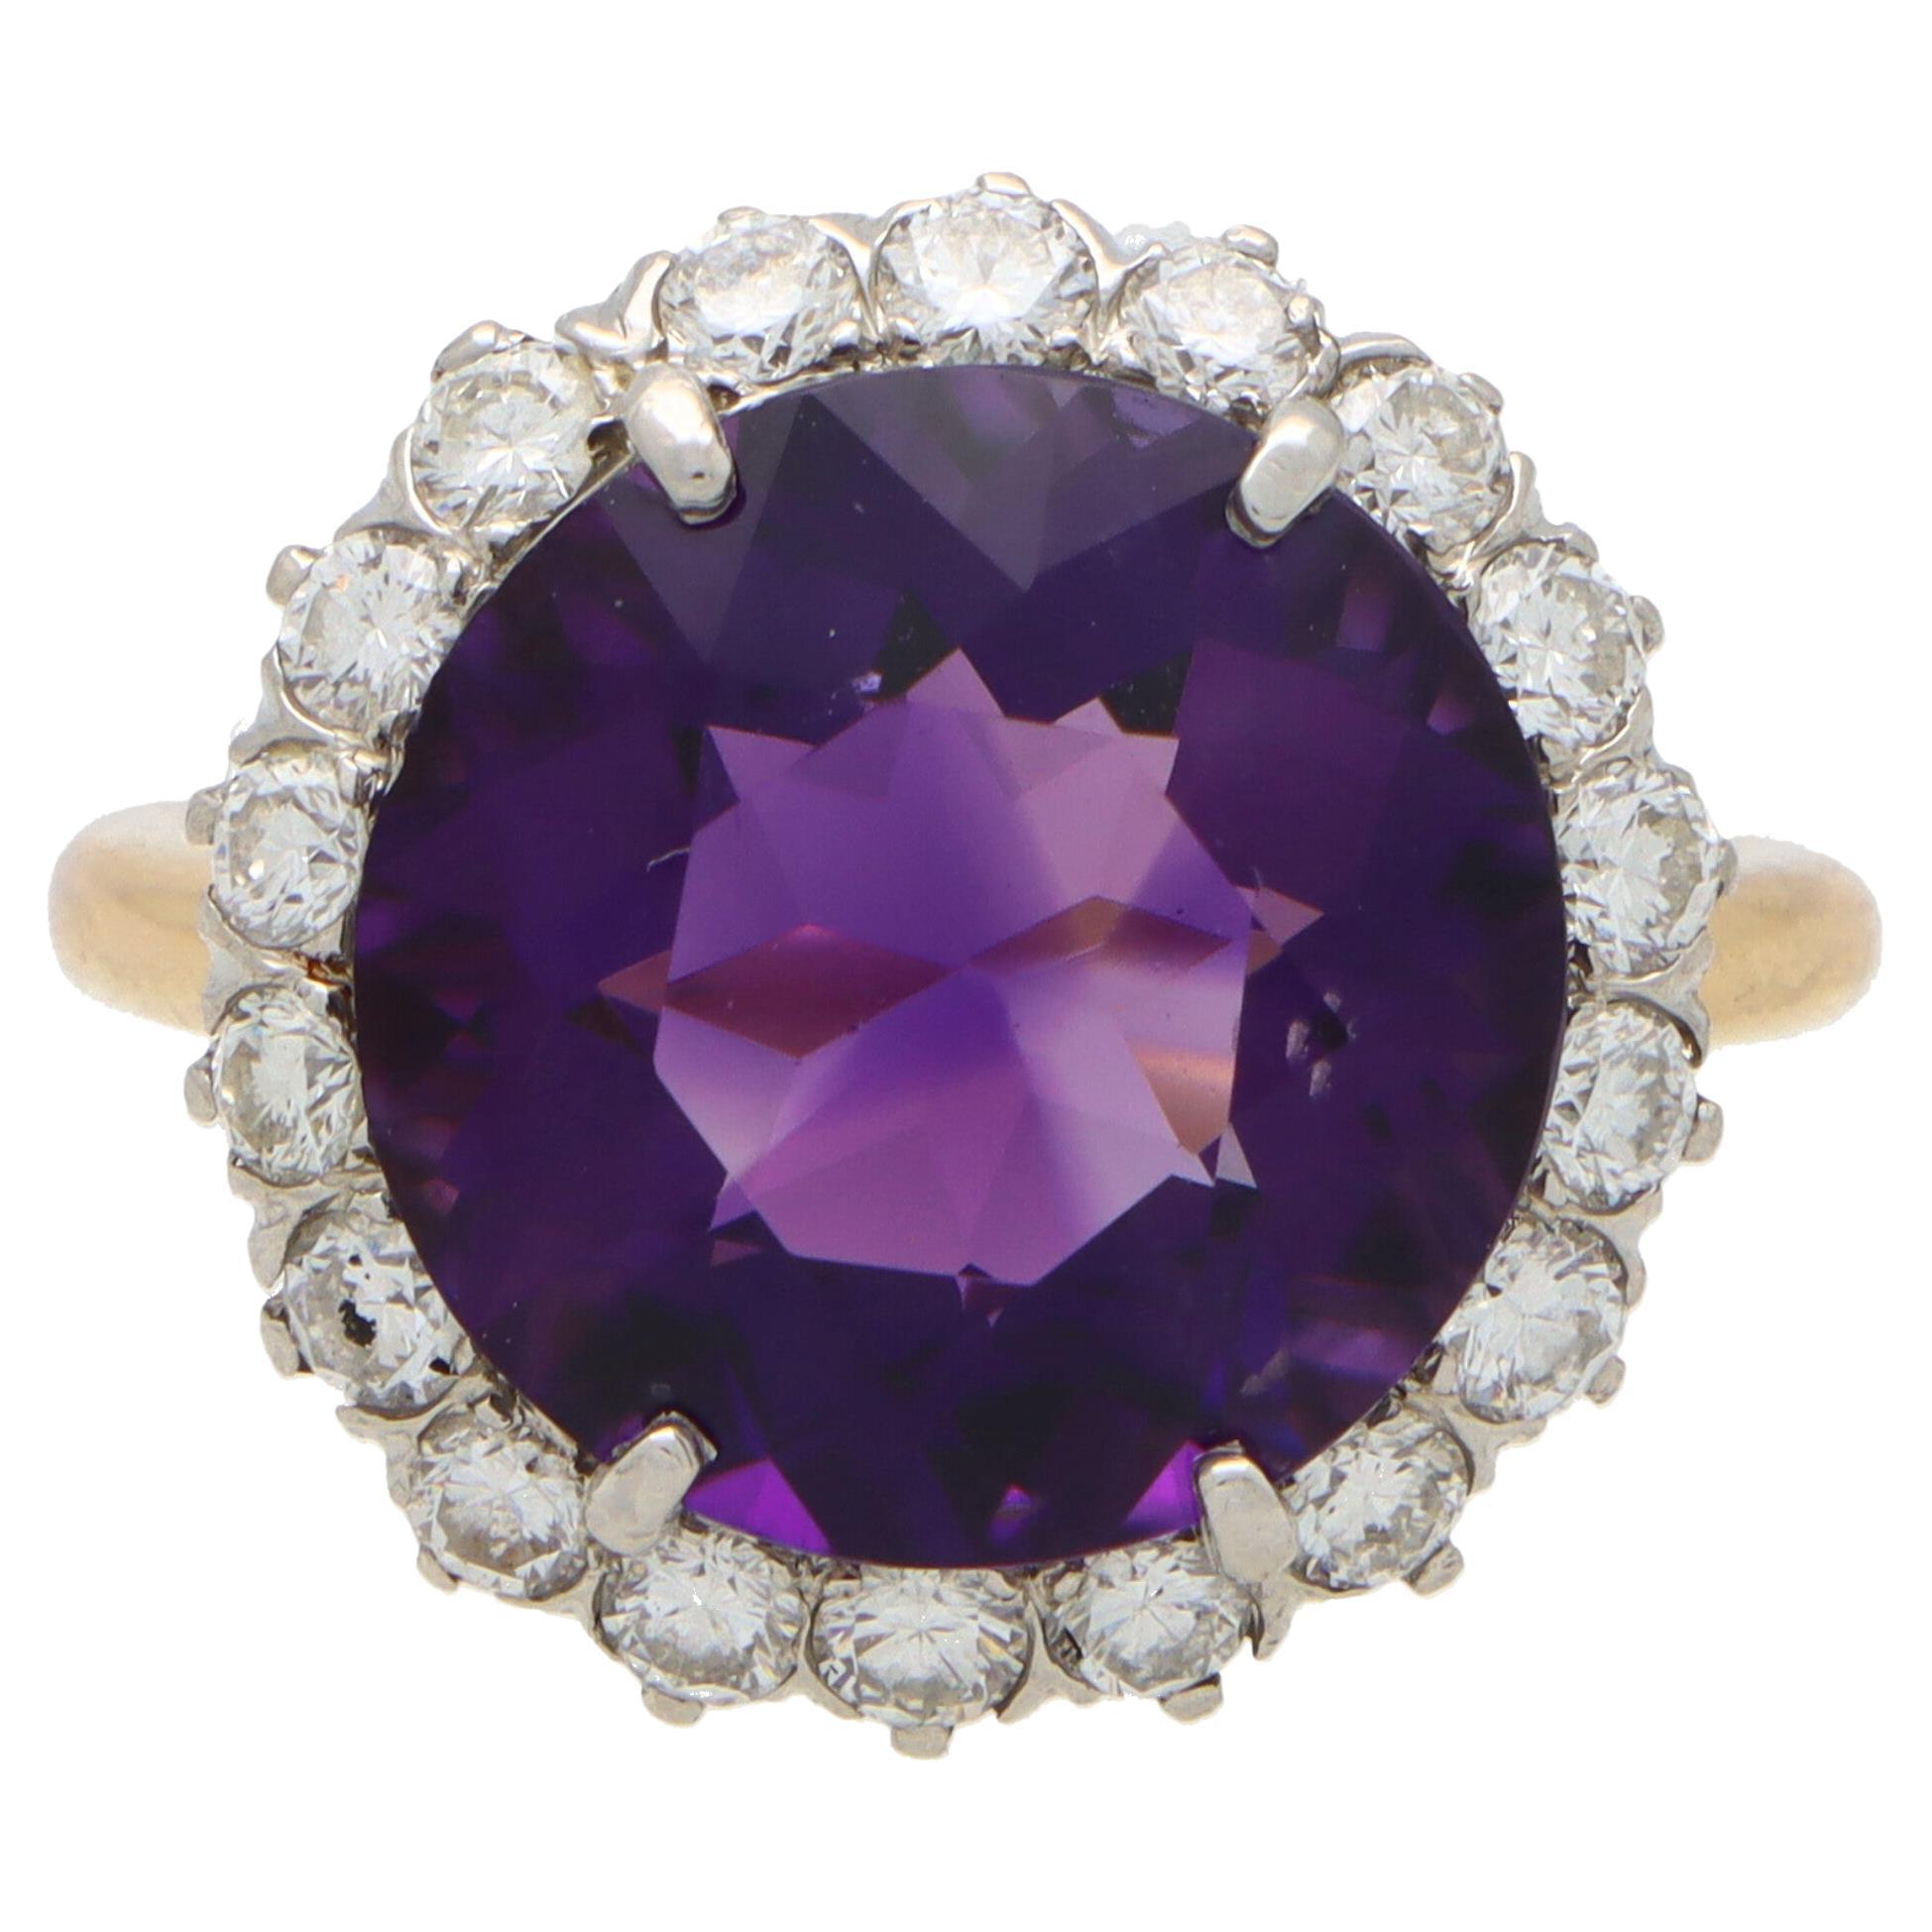 Vintage Tiffany & Co. Amethyst and Diamond Cluster Ring Set in 14K Gold